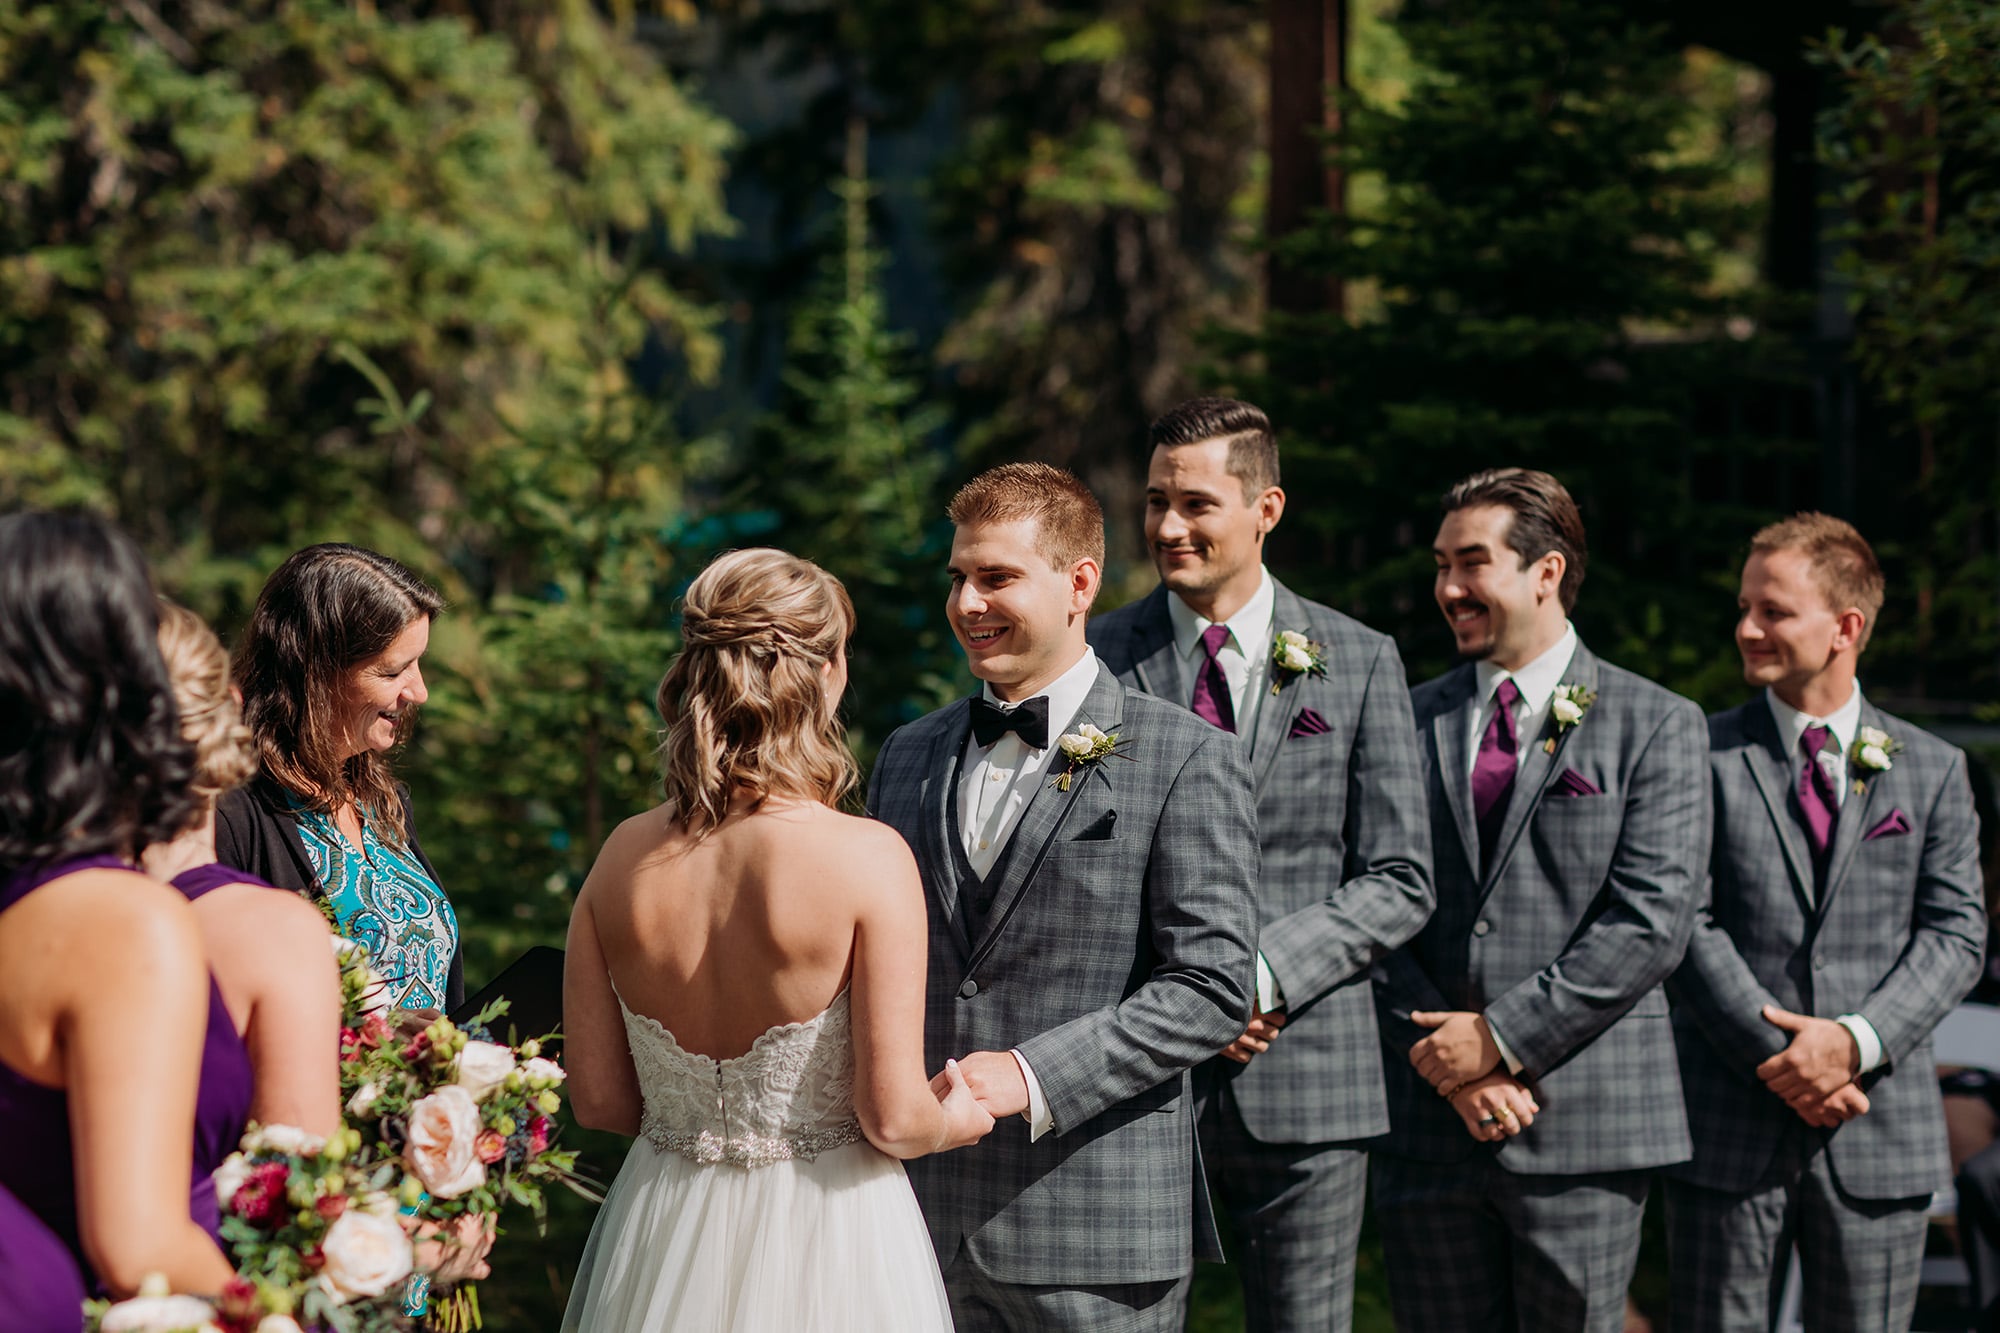 emerald lake autumn wedding outdoor ceremony at viewpoint